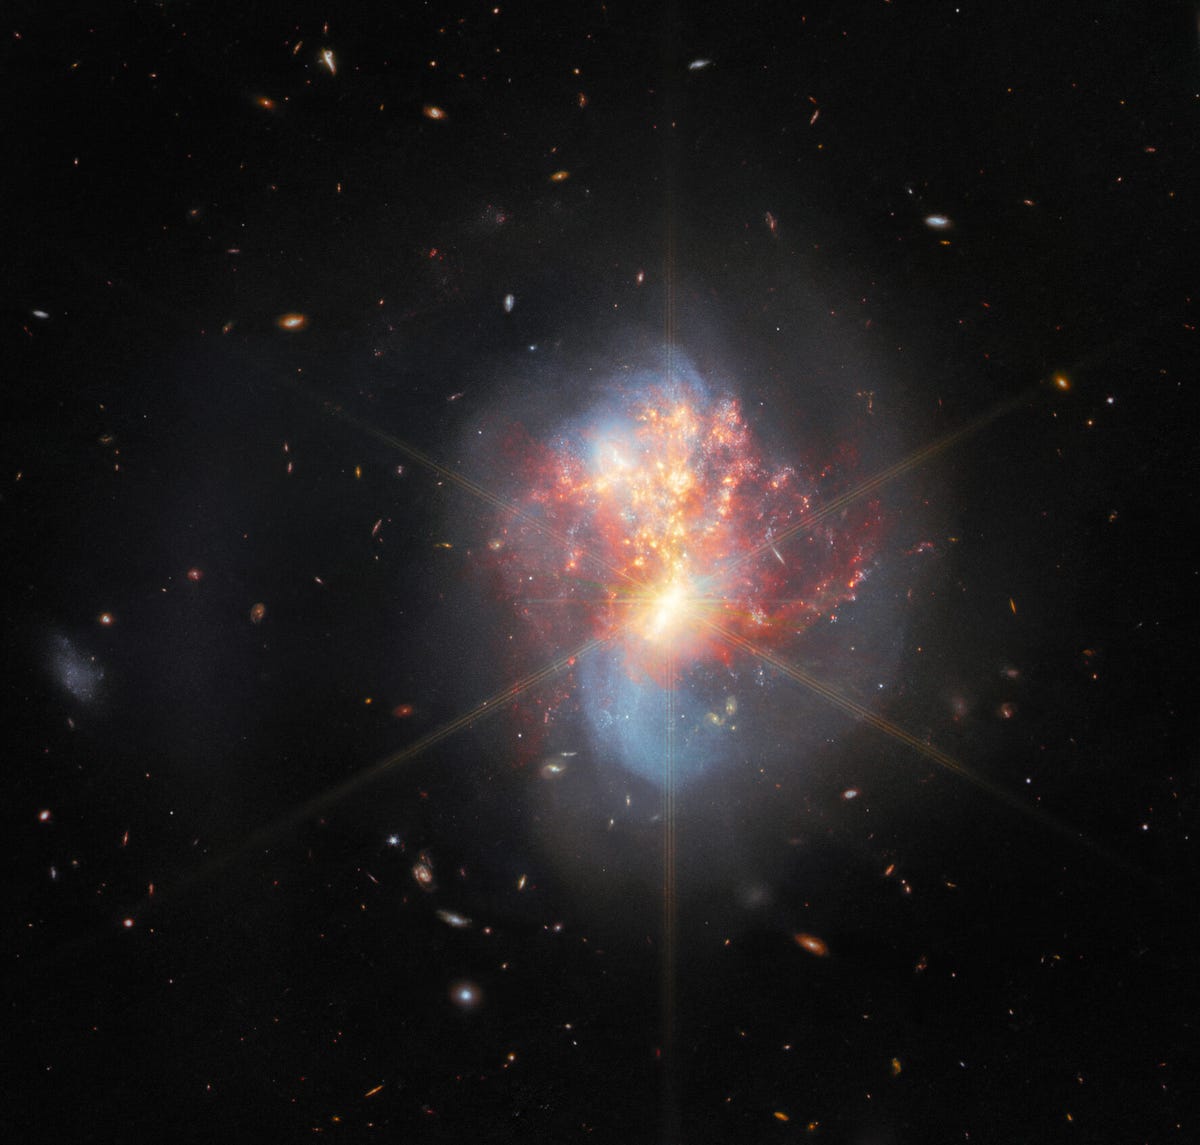 Against the background of space, lots of tiny spots represent giant galaxies across the universe. At the center is a scene of two merging galaxies, which looks like a swirls of pink, red and blue blurs. The JWST's iconic diffraction spikes are seen, too.